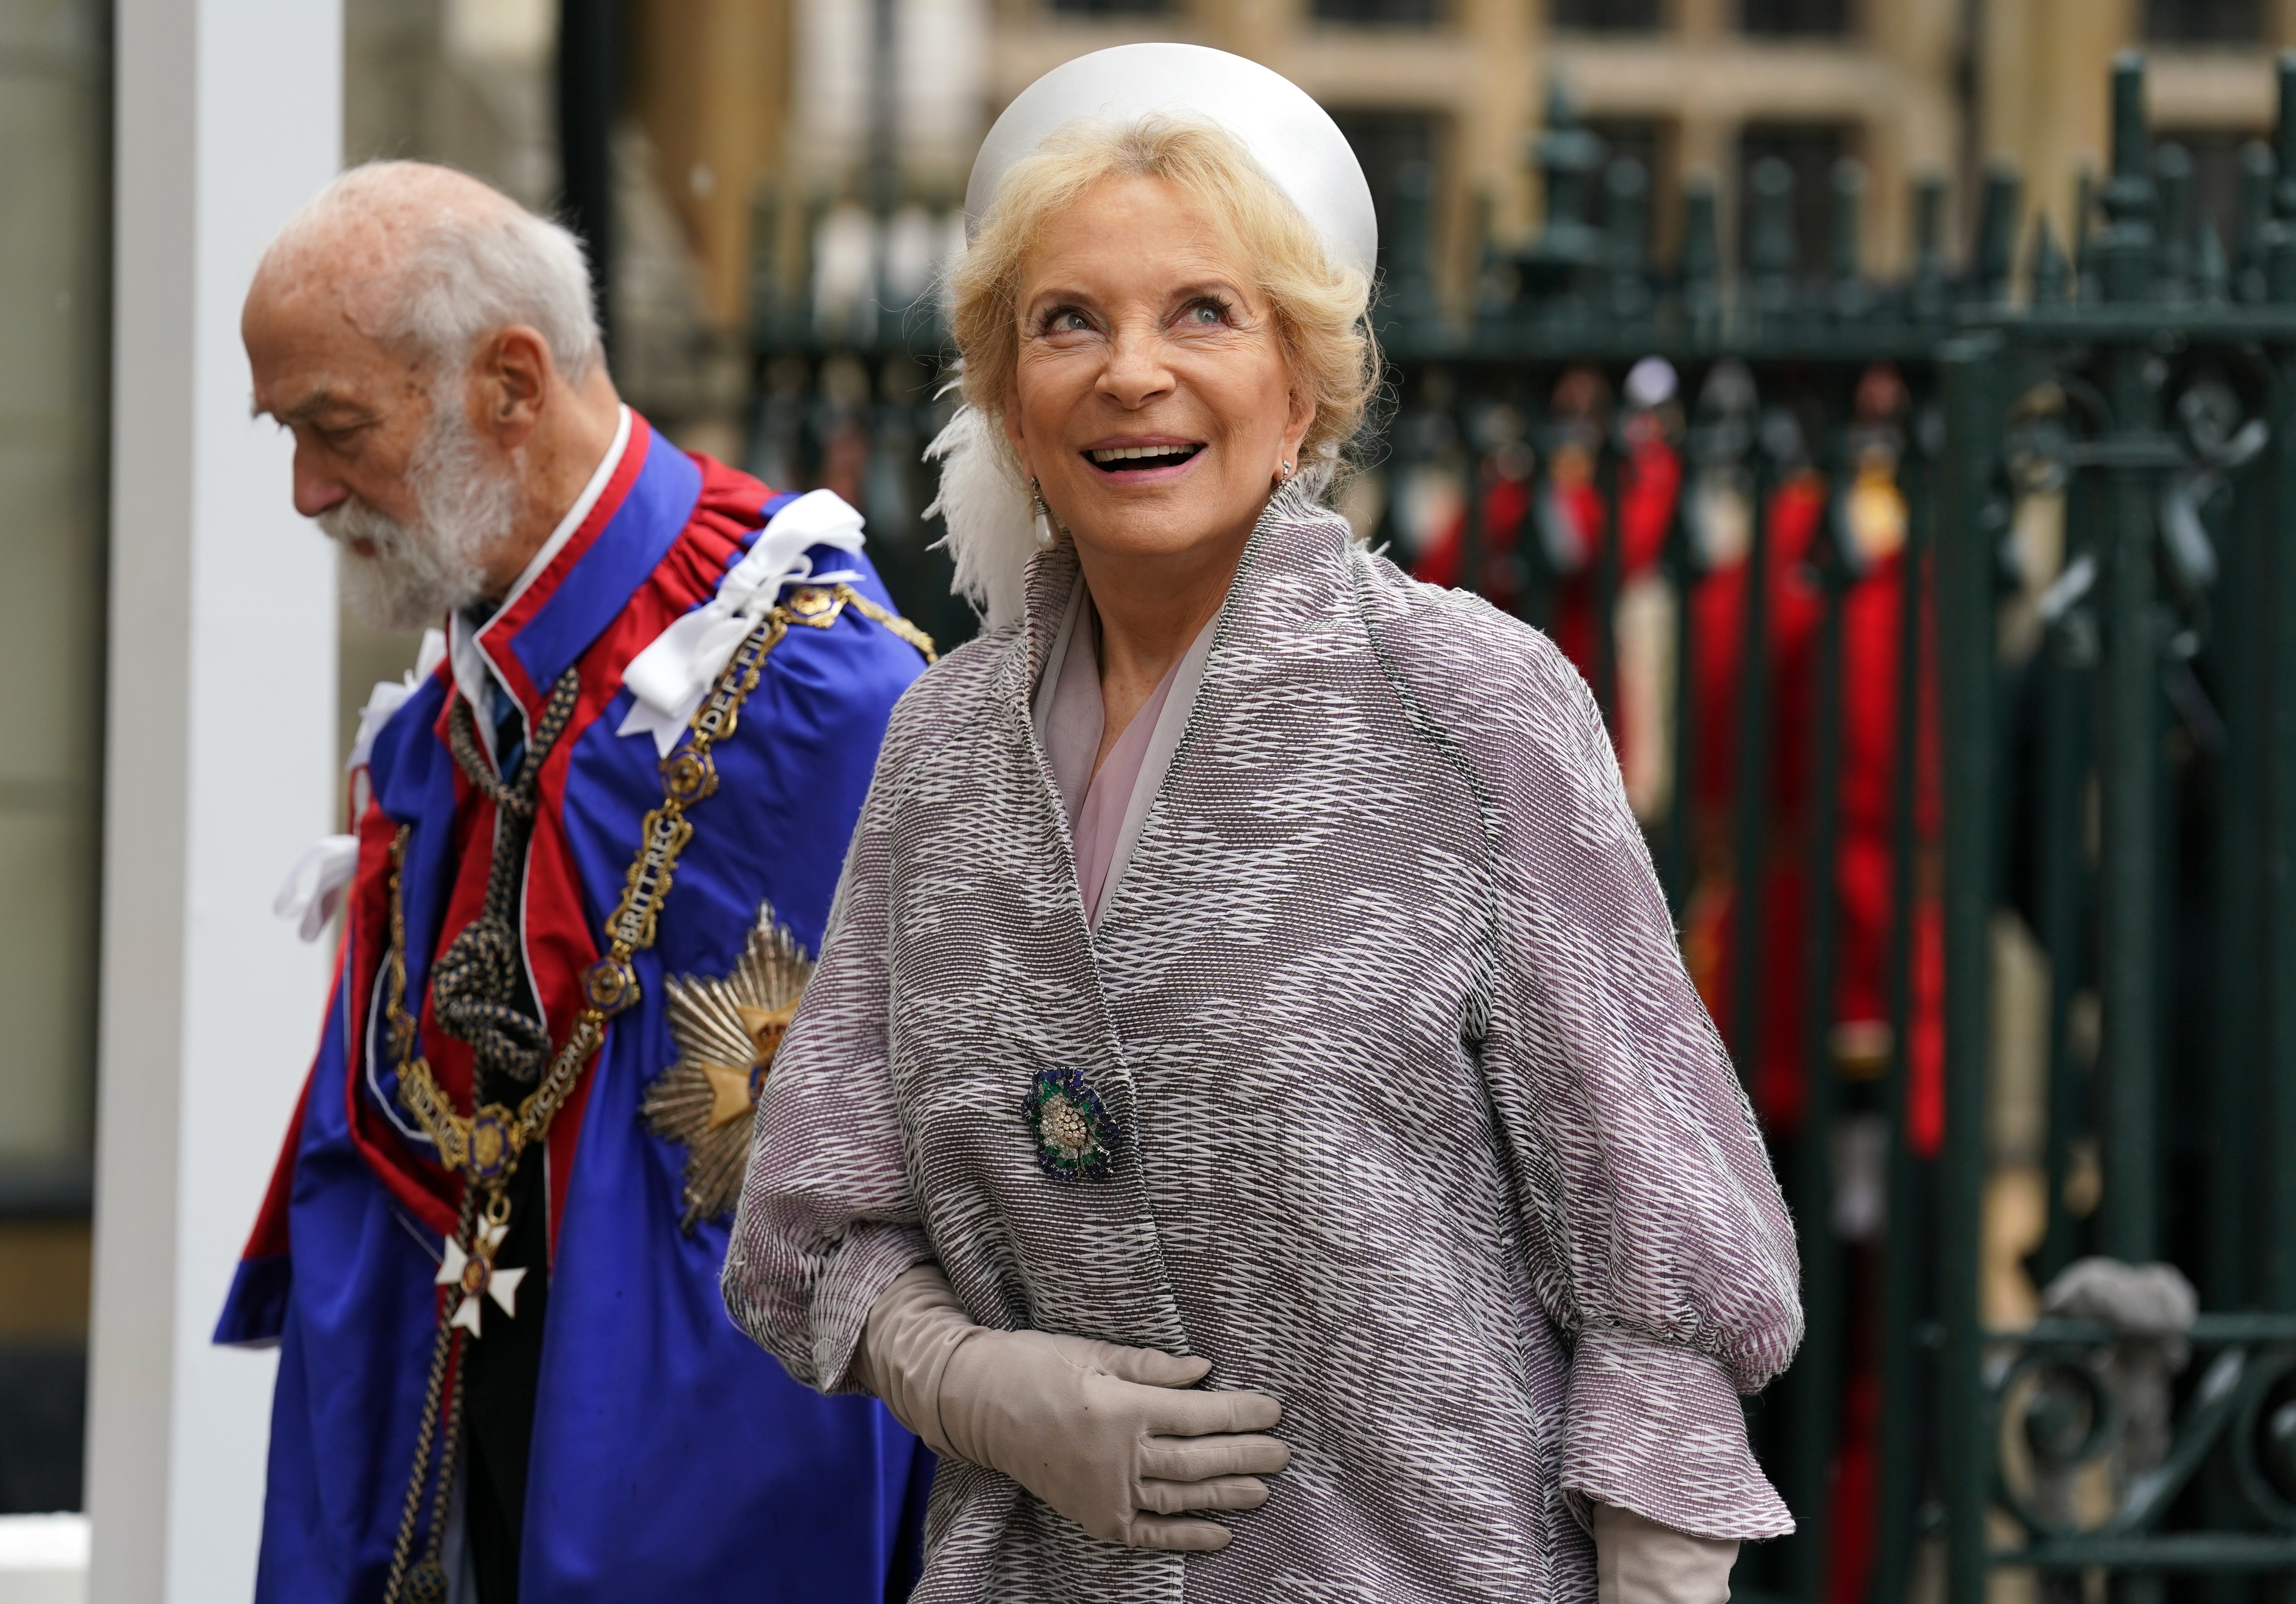 Princess Michael of Kent and Prince Michael of Kent arriving at Westminster Abbey ahead of the coronation ceremony of King Charles III and Queen Camilla on May 6, 2023